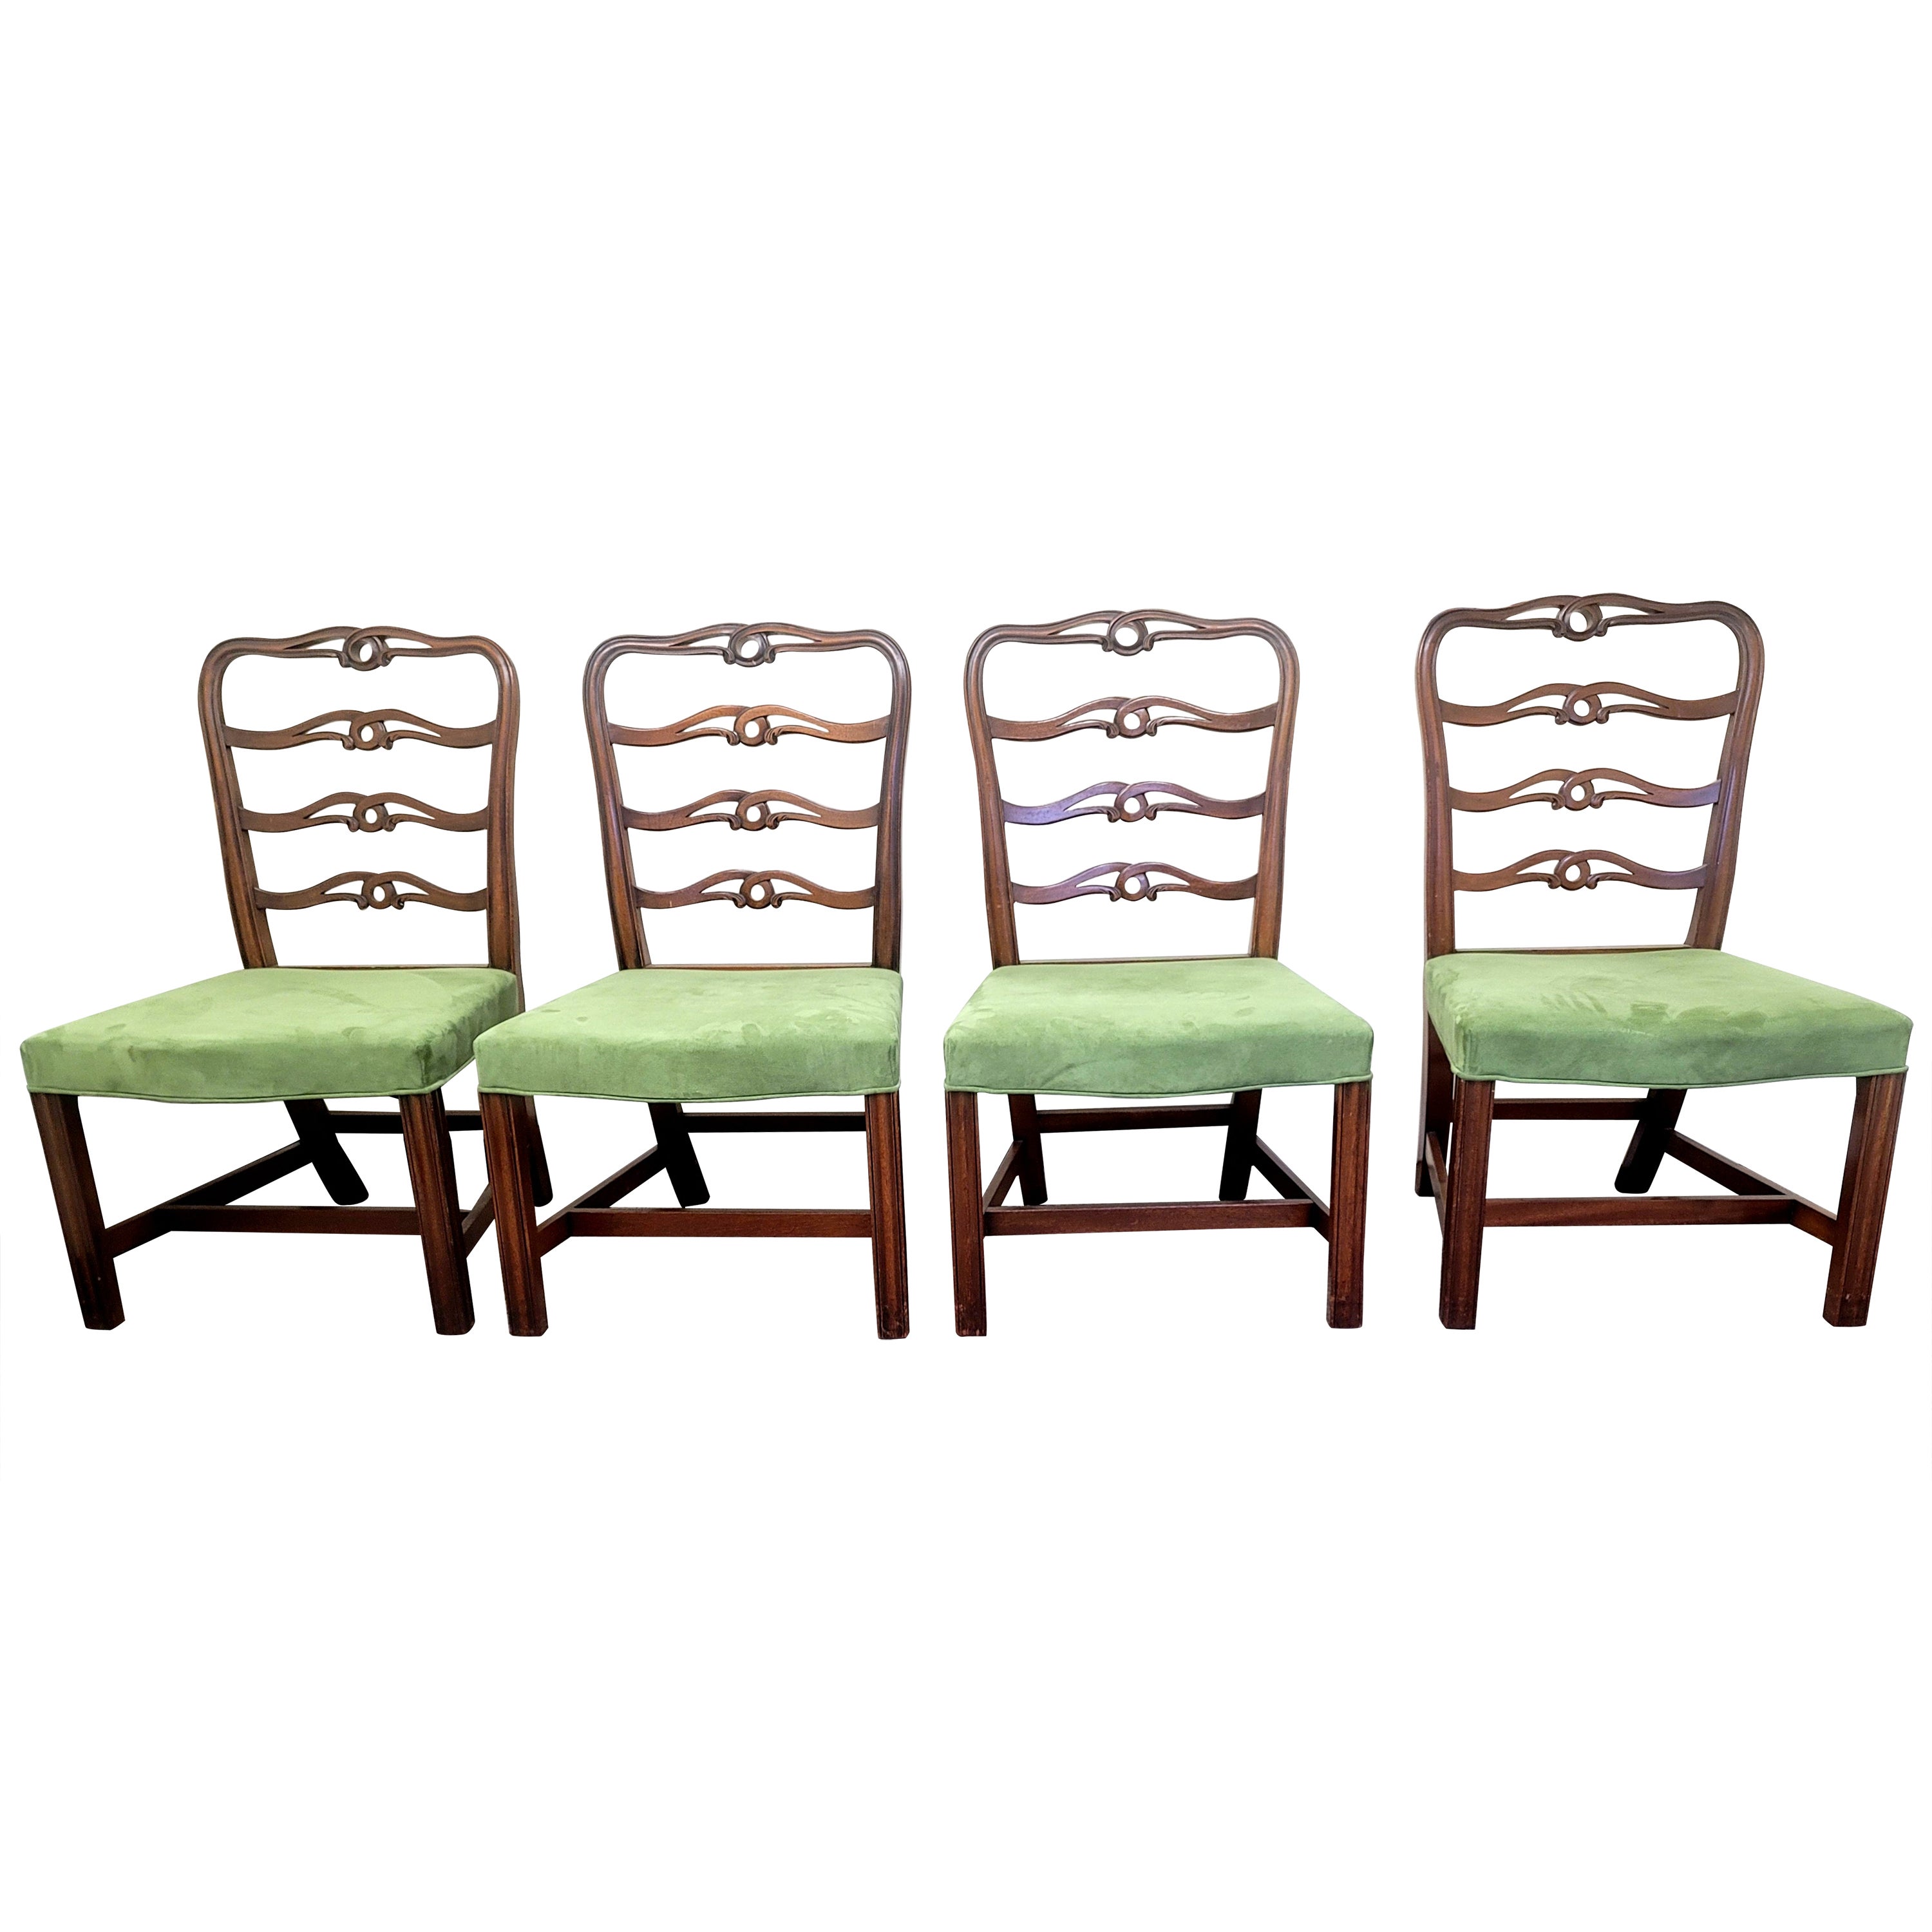 19th C. Georgian Set of 4 Pierced Ladder Back Leather Upholstered Dining Chairs For Sale